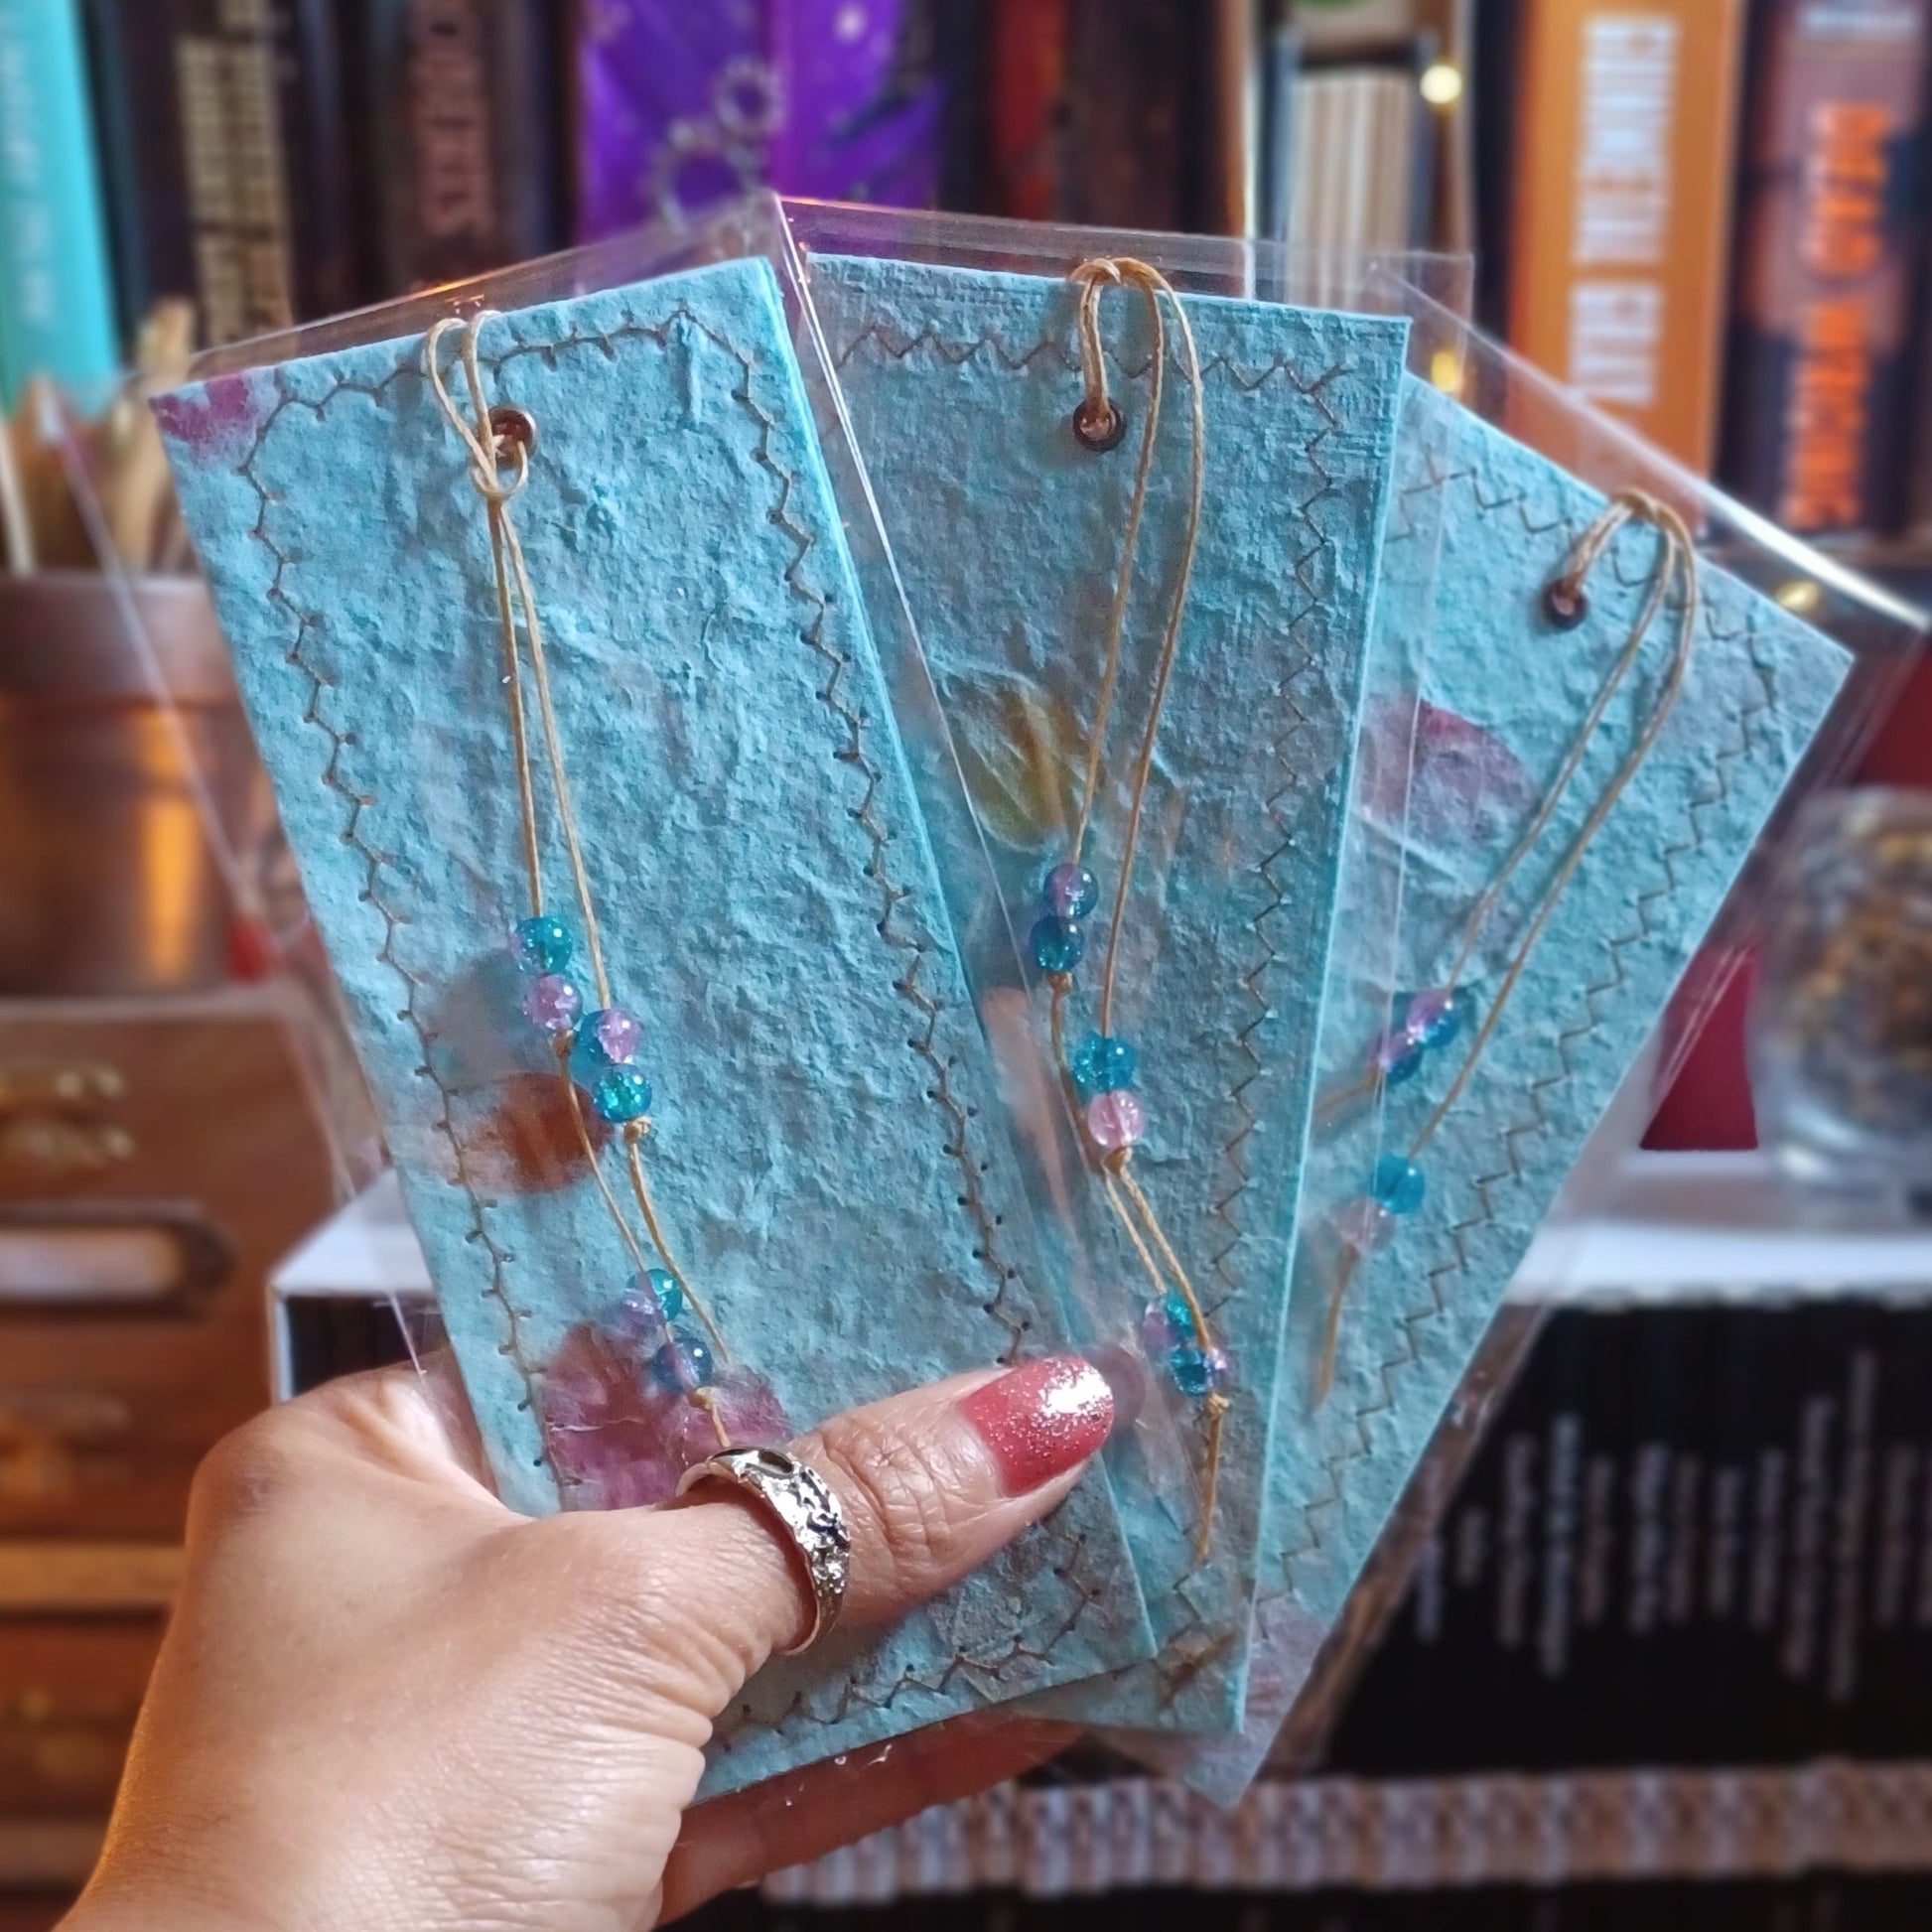 Blue - Handmade Paper Bookmarks with Stitched Edges, Pressed Flowers and Leaves  